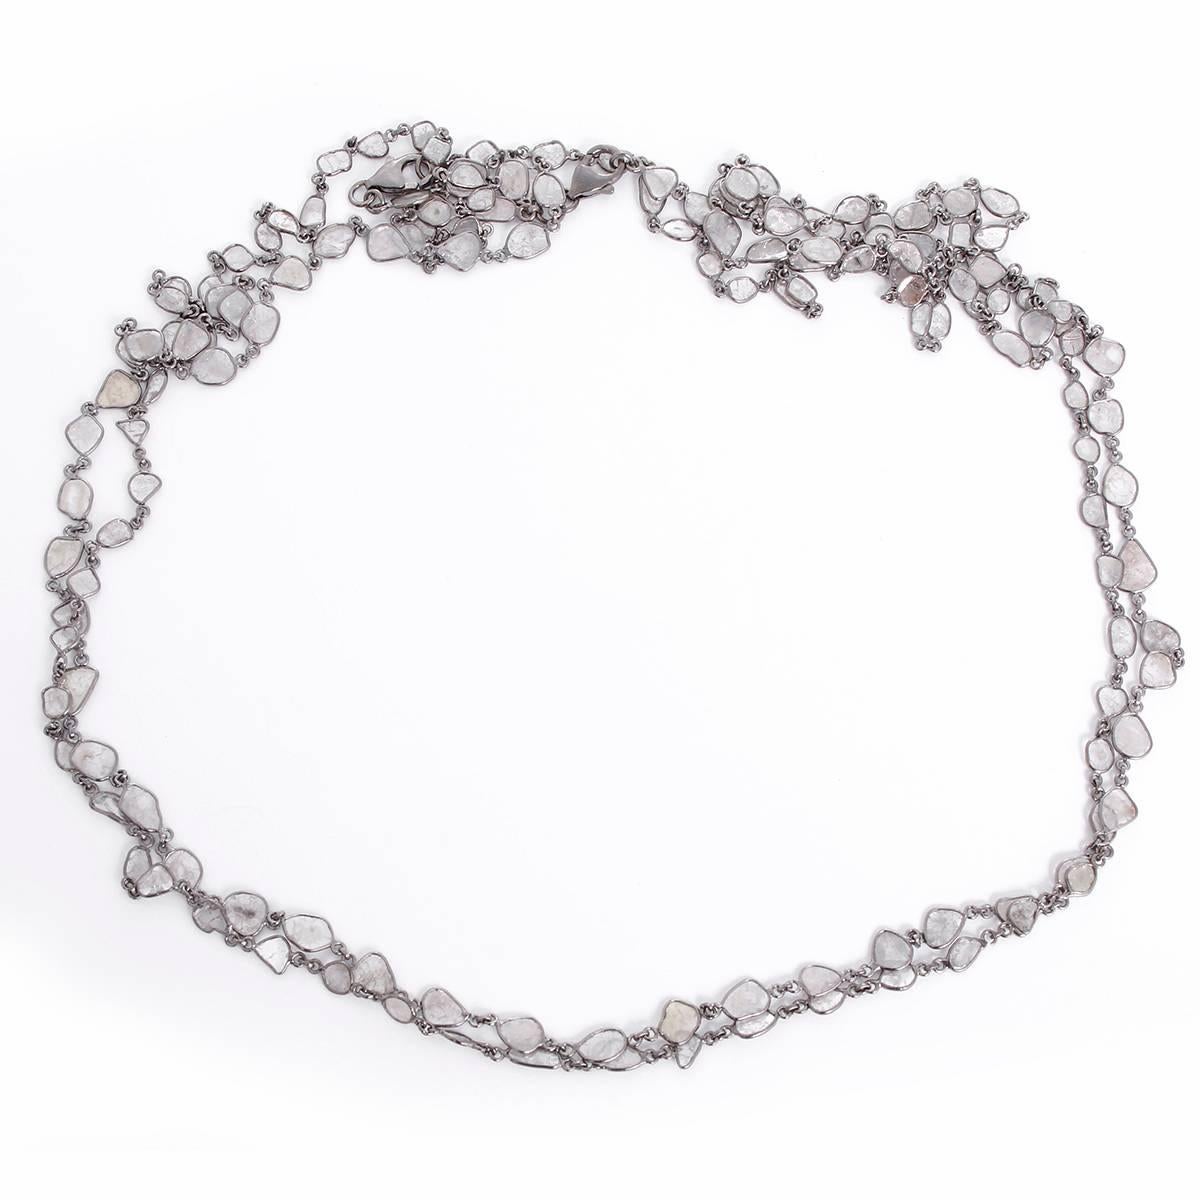 Beautiful Sliced Diamond and Oxidized Silver Long Chain Necklace -  This beautiful necklace features 20.5 ctw. of sliced diamonds set in oxidized silver. This necklace can be worn double and is perfect for layering with other pieces!  Necklace